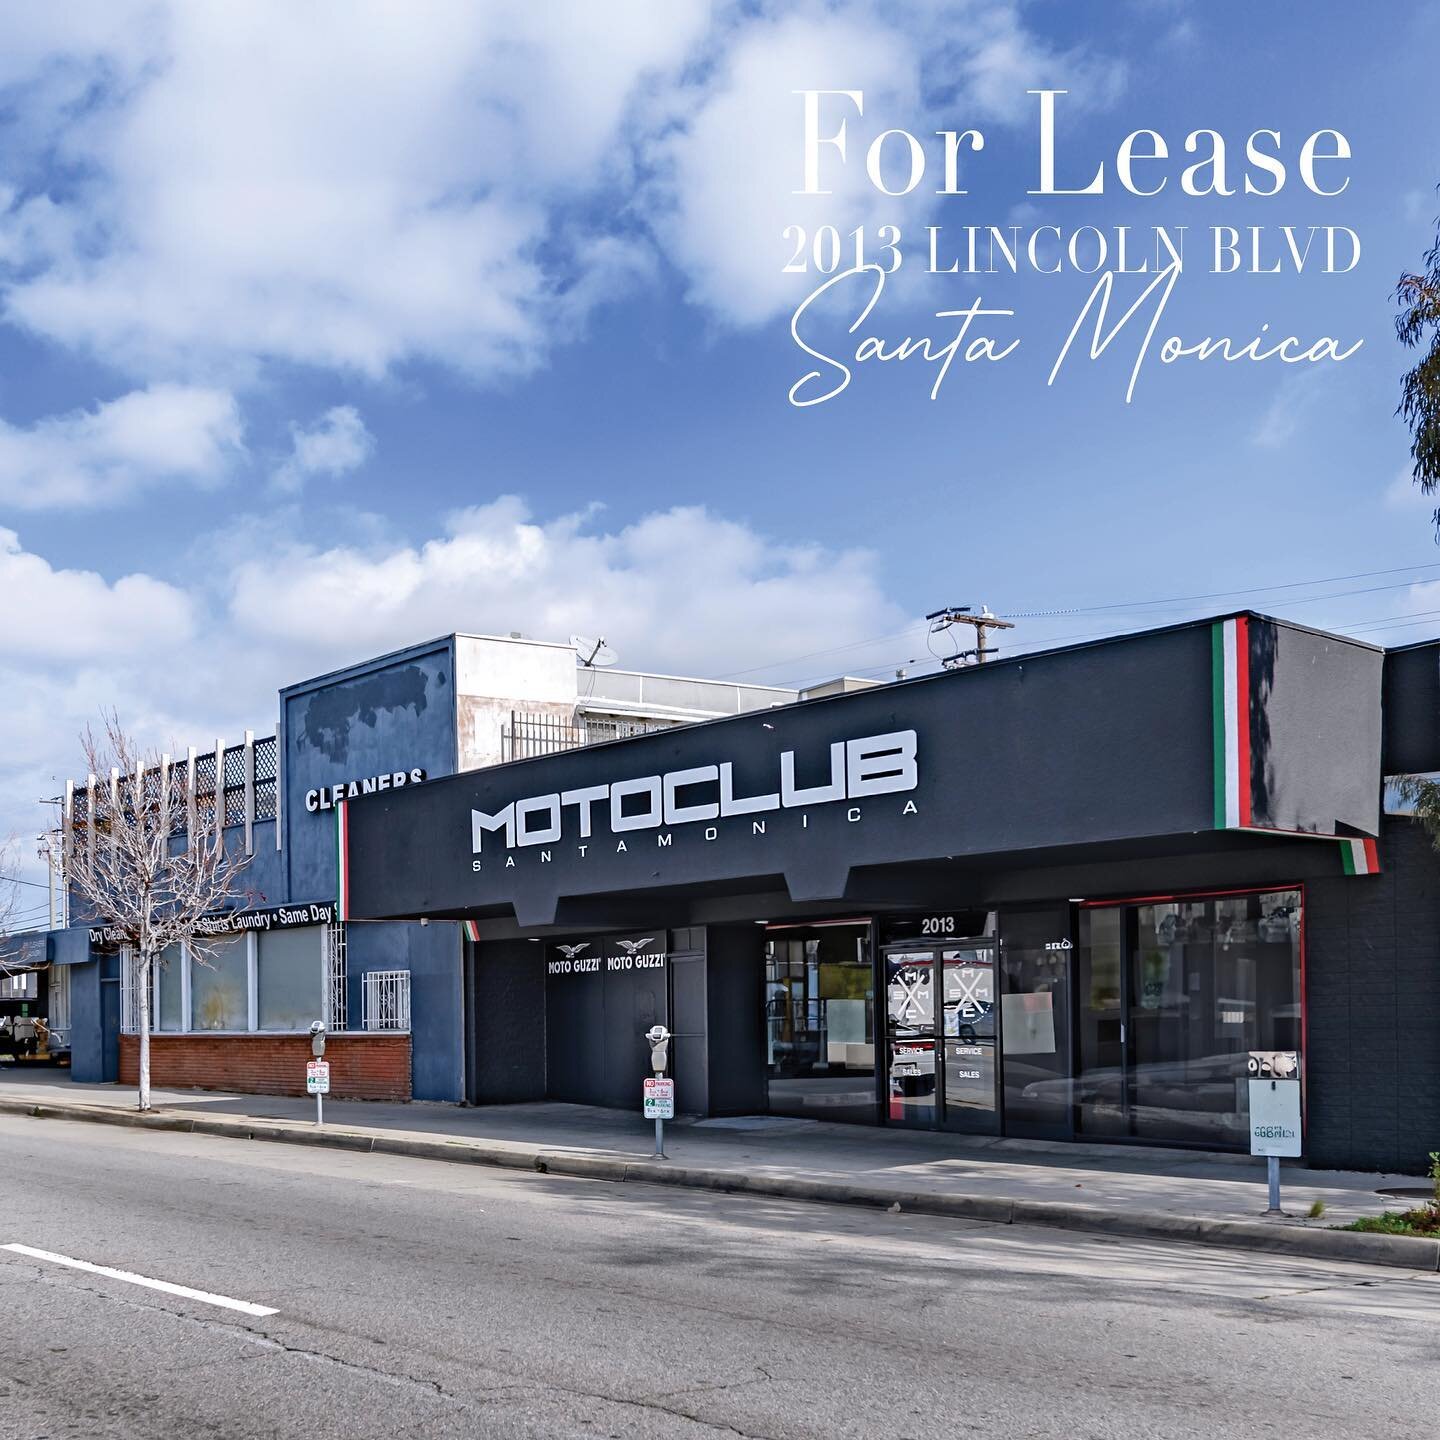 FOR LEASE: High Visibility Retail Store Front Showroom 🏁 2013 Lincoln Blvd, Santa Monica

-High-traffic exposure on Lincoln Boulevard
-Expansive window line, creative vibe interiors with high exposed ceilings
-Currently an auto/moto retail showroom 